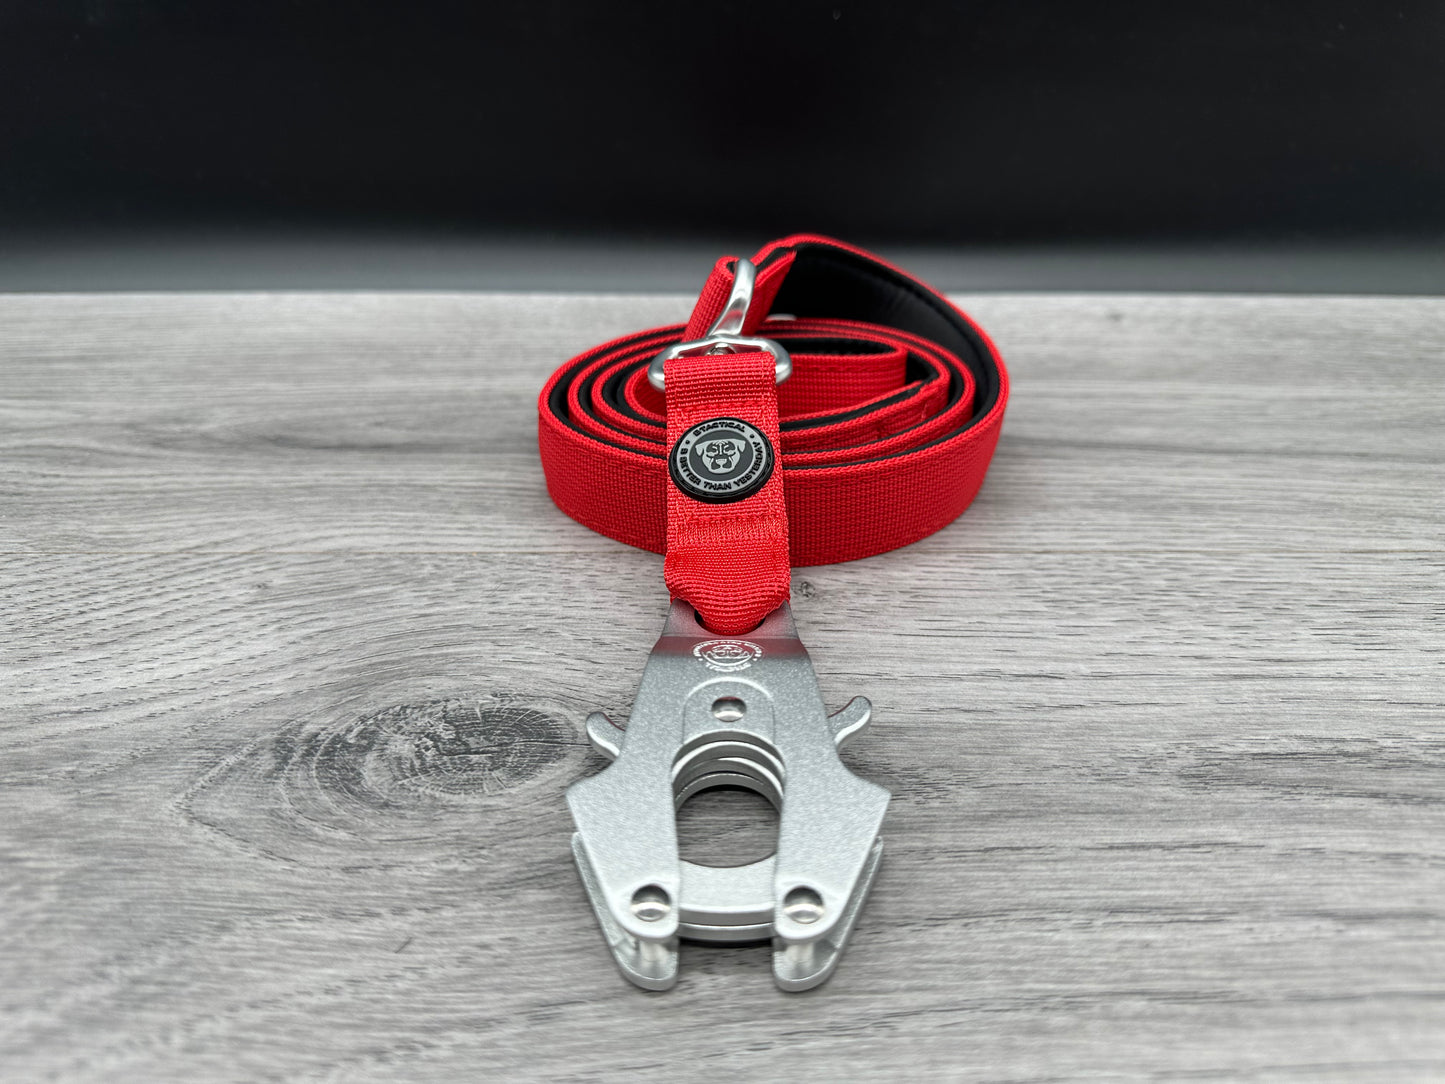 2.5cm BTactical Collar - Red | Durable Dog Collar, Lead & Harness Set